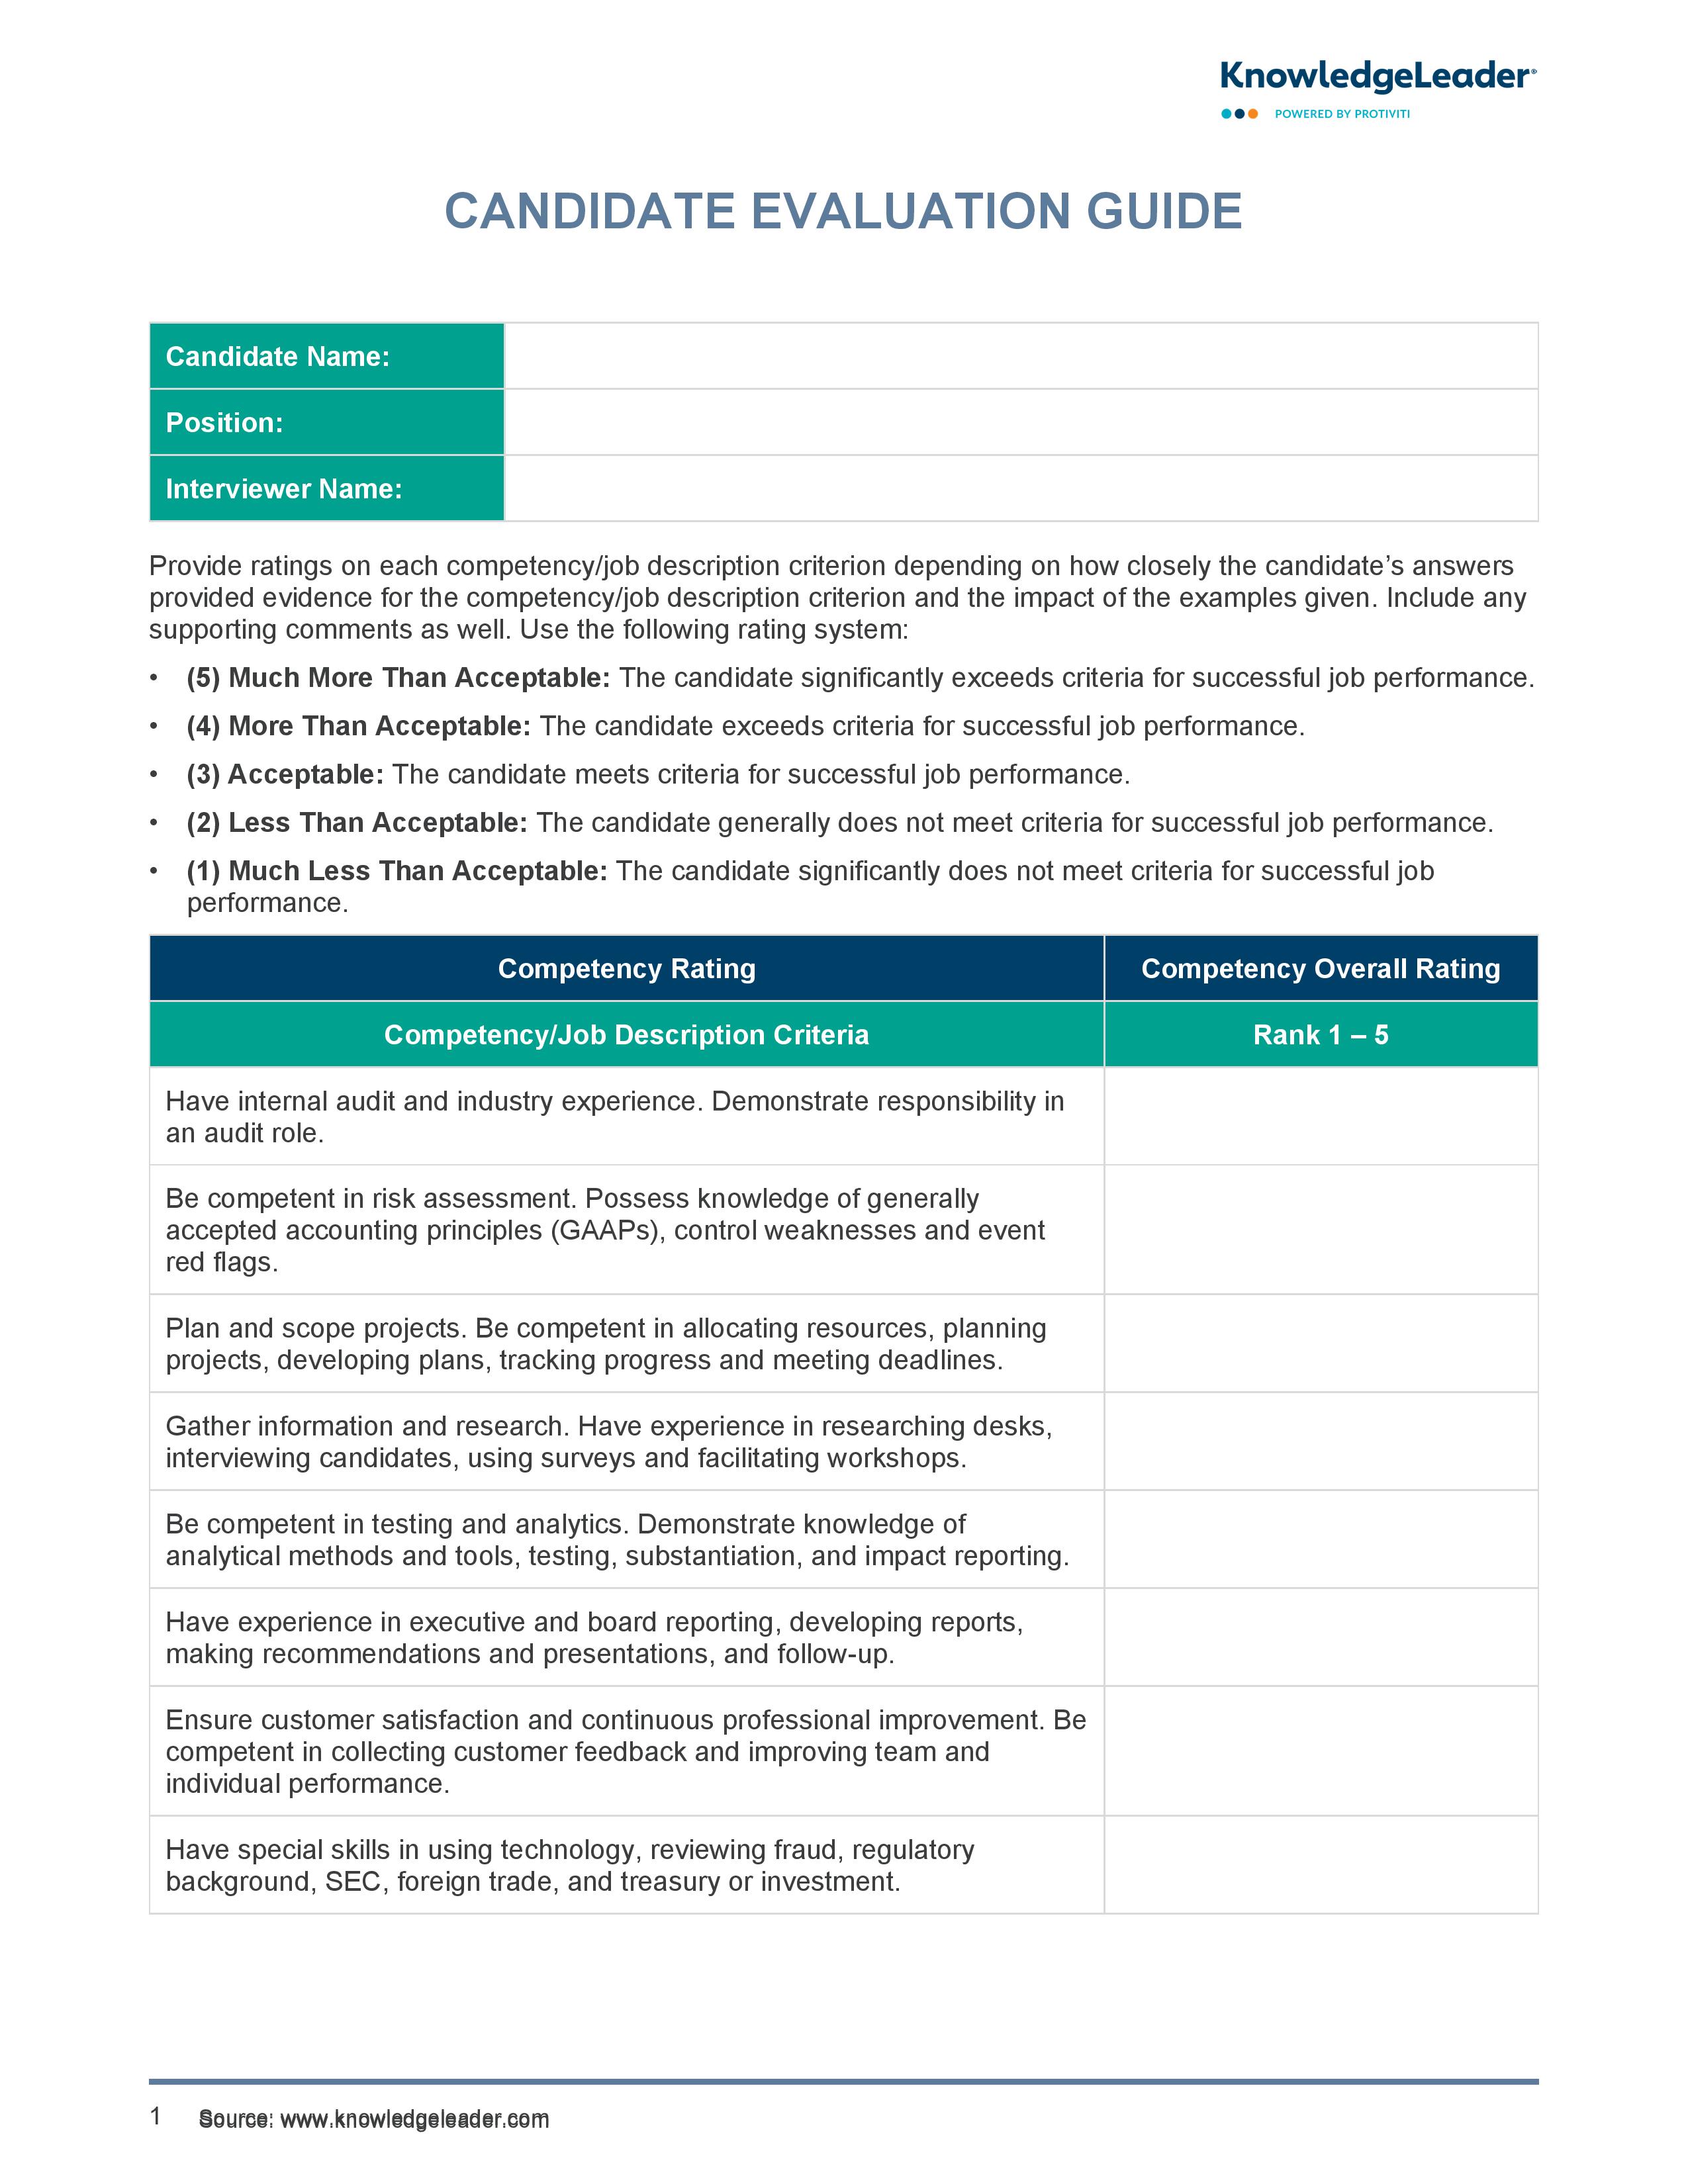 screenshot of the first page of Candidate Evaluation Guide